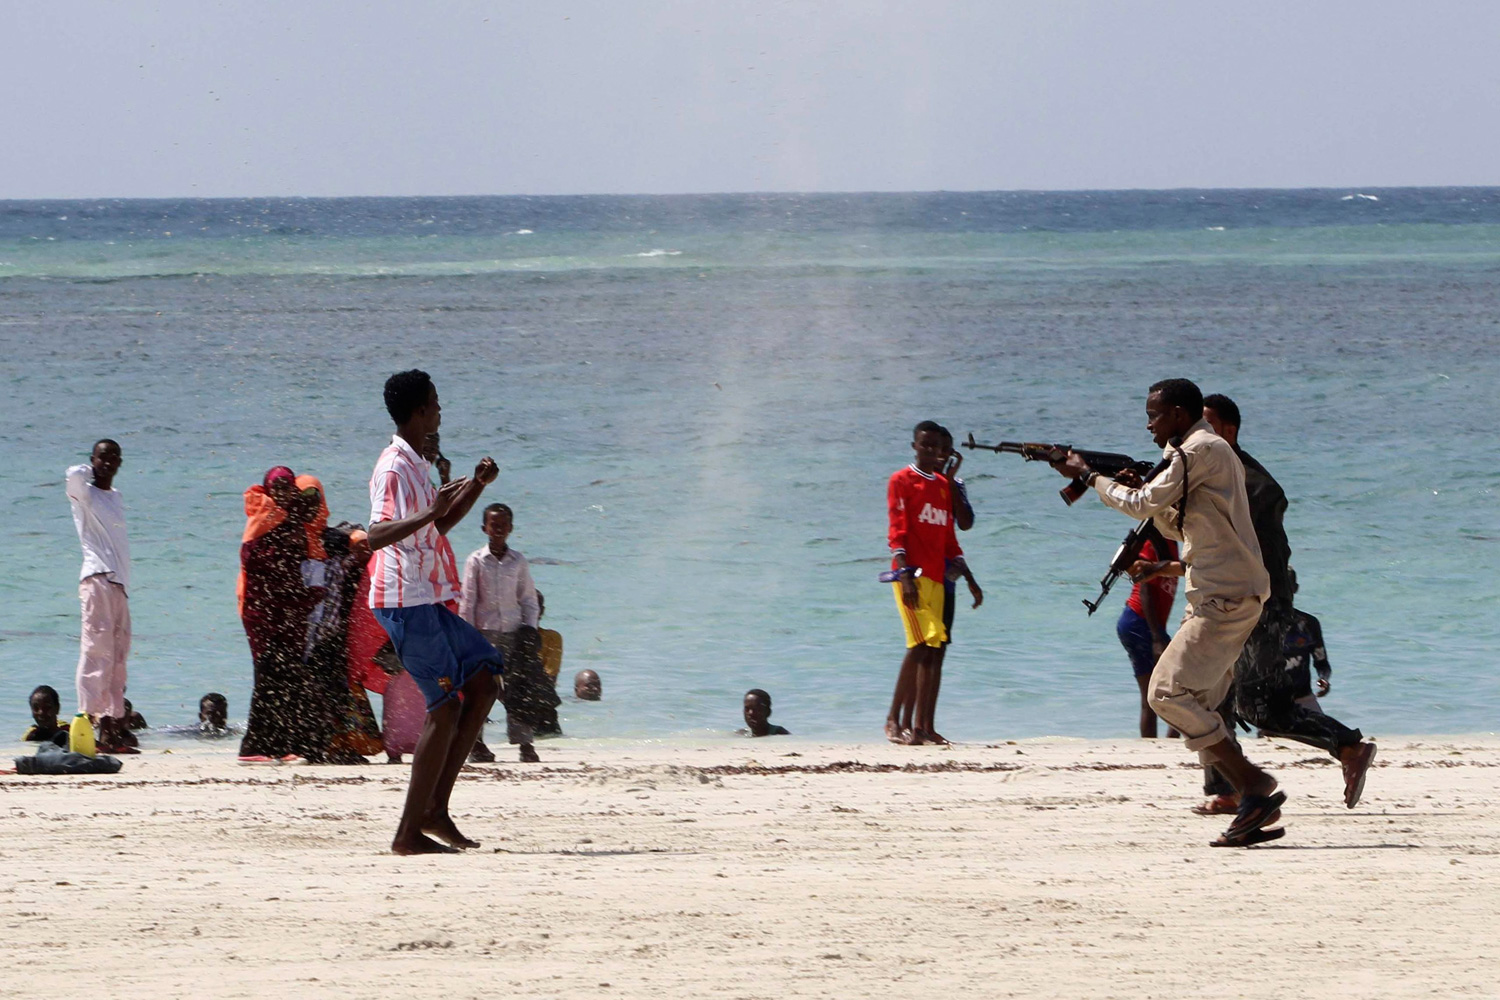 March 23, 2012. A Somali police officer, right, arrests a suspected rebel member of the Al Qaeda-affiliated al-Shabaab, left, among beach goers at the Lido beach north of Somalia's capital Mogadishu.